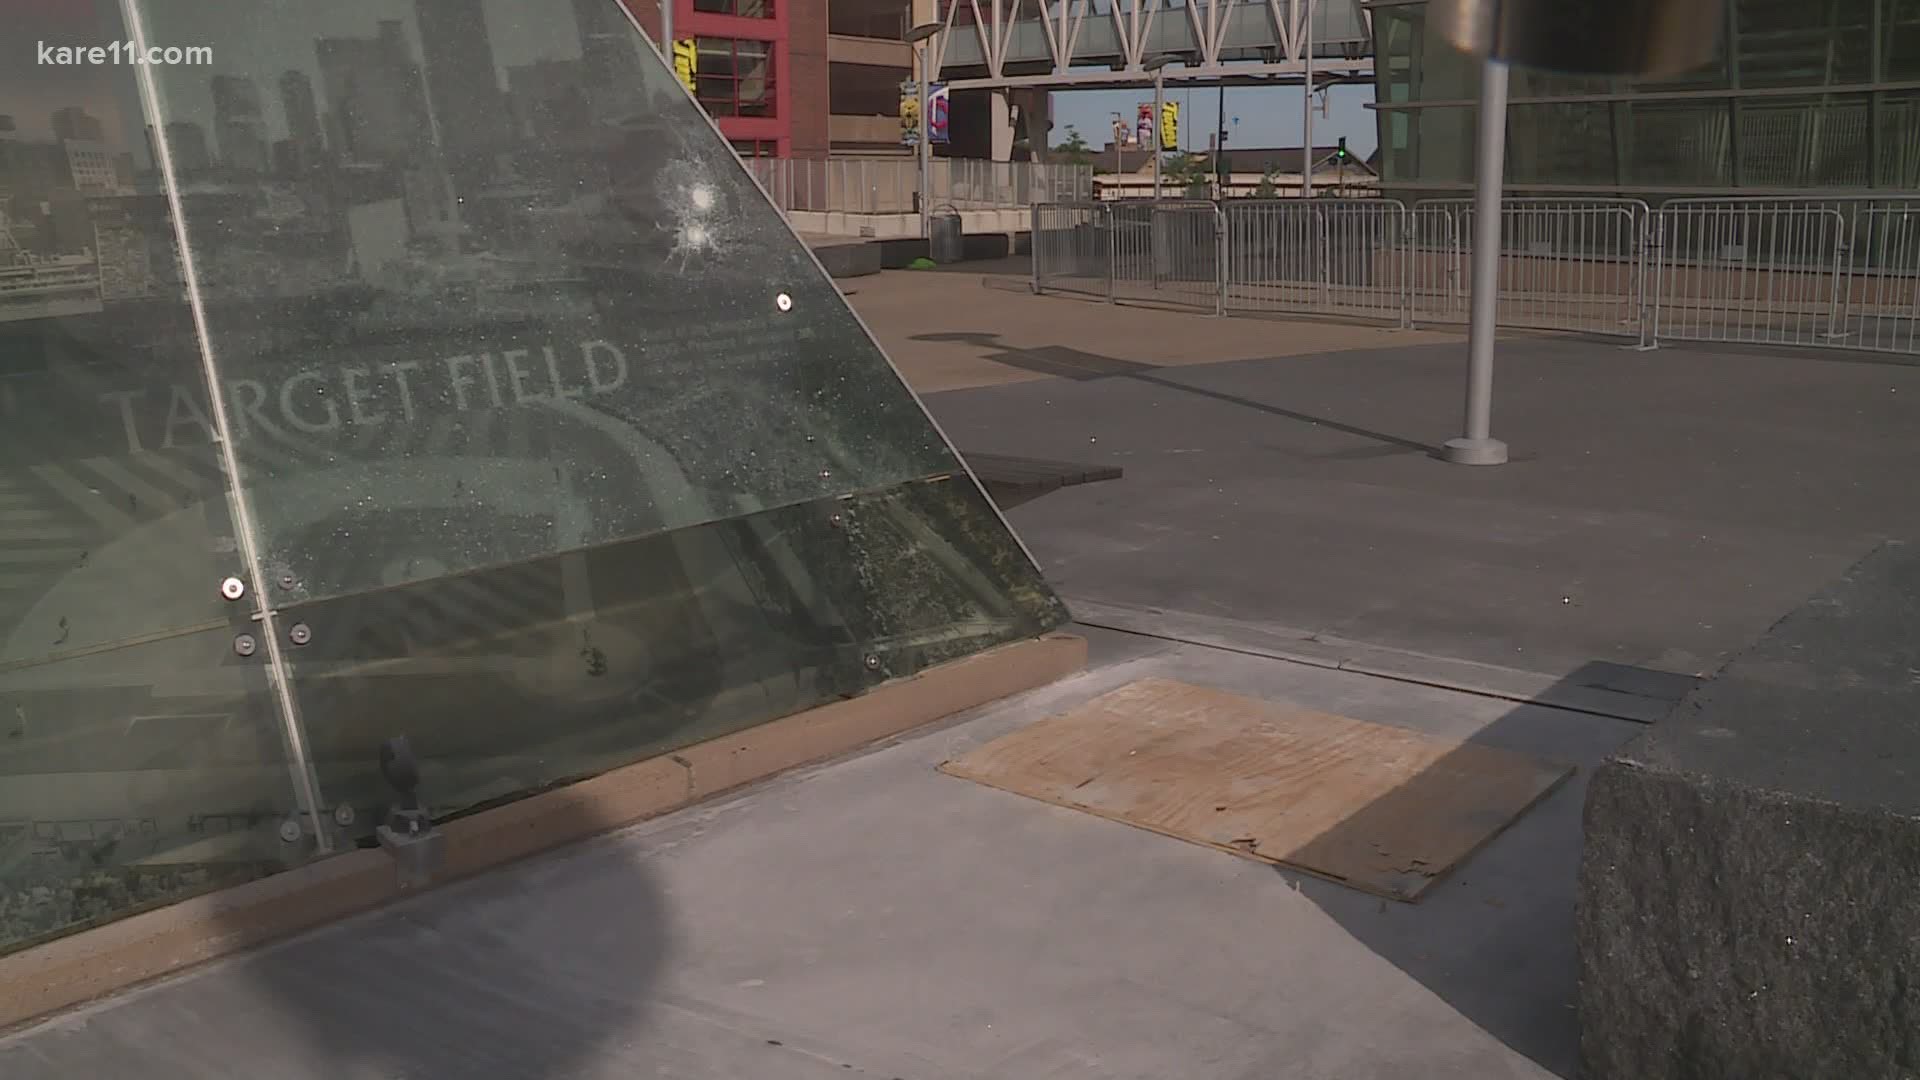 The team cited racism from the past owner as the statue was quietly removed Friday morning